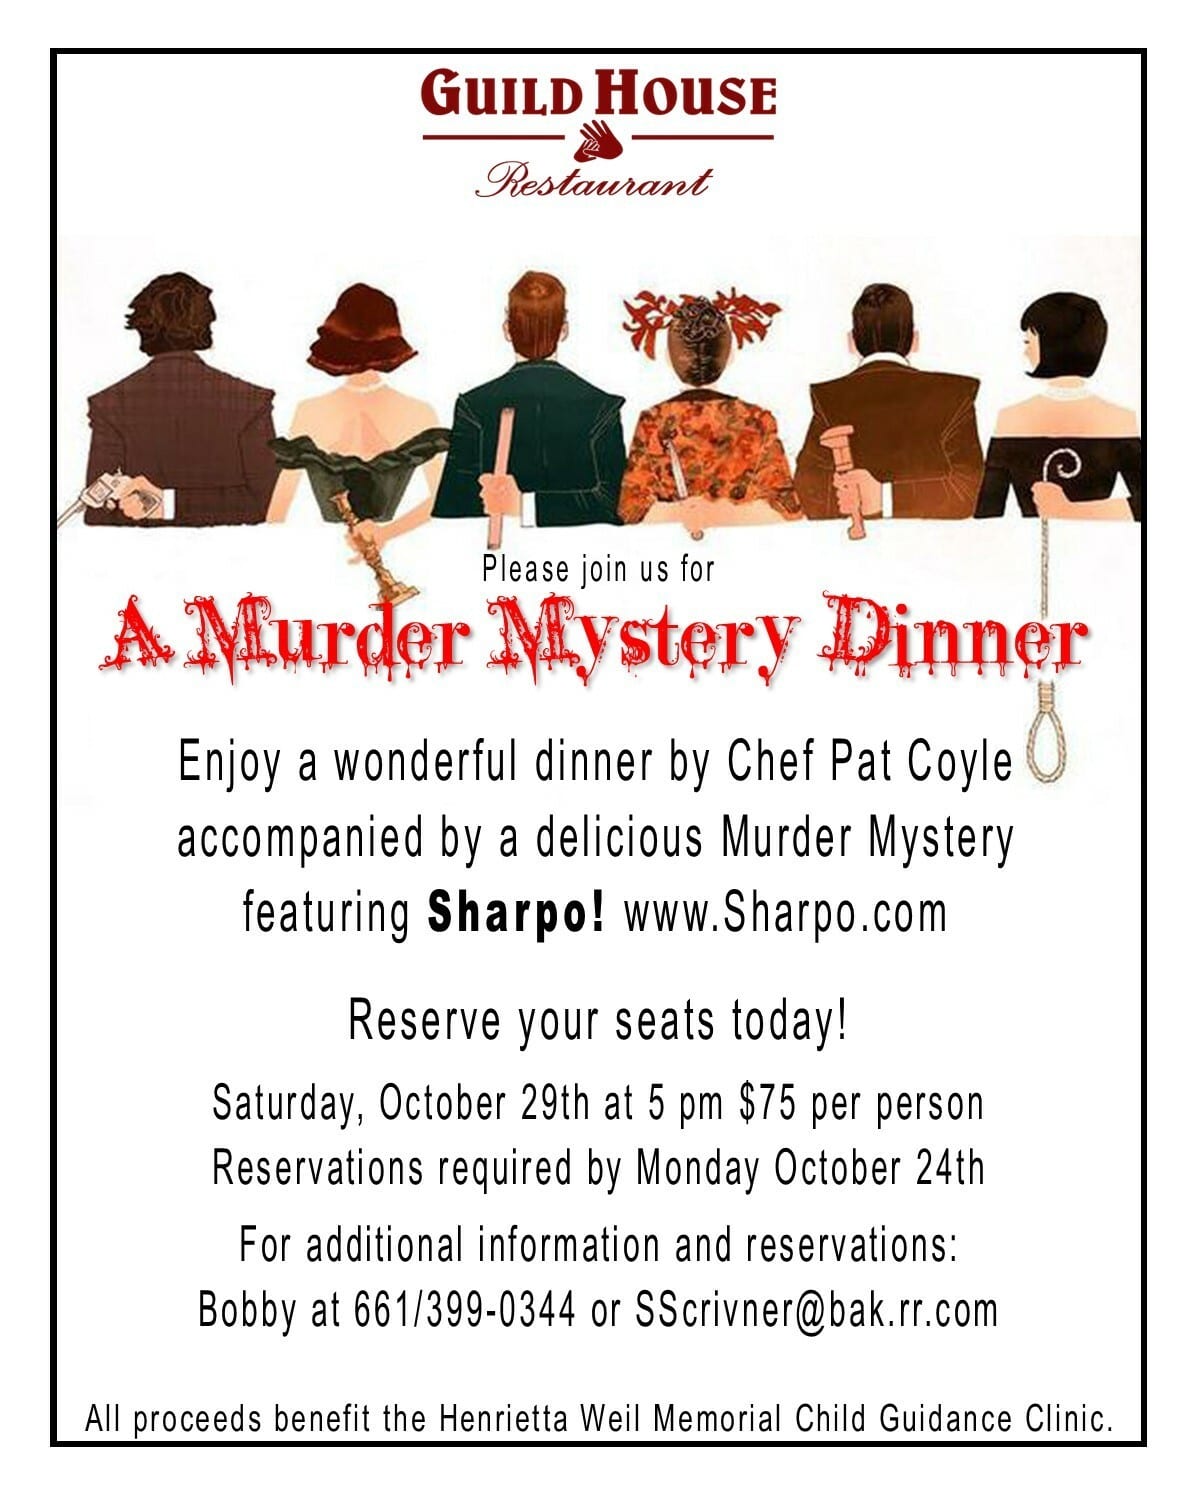 Murder Mystery Dinner Show October 29th at the Guidlhouse Bakersfield.